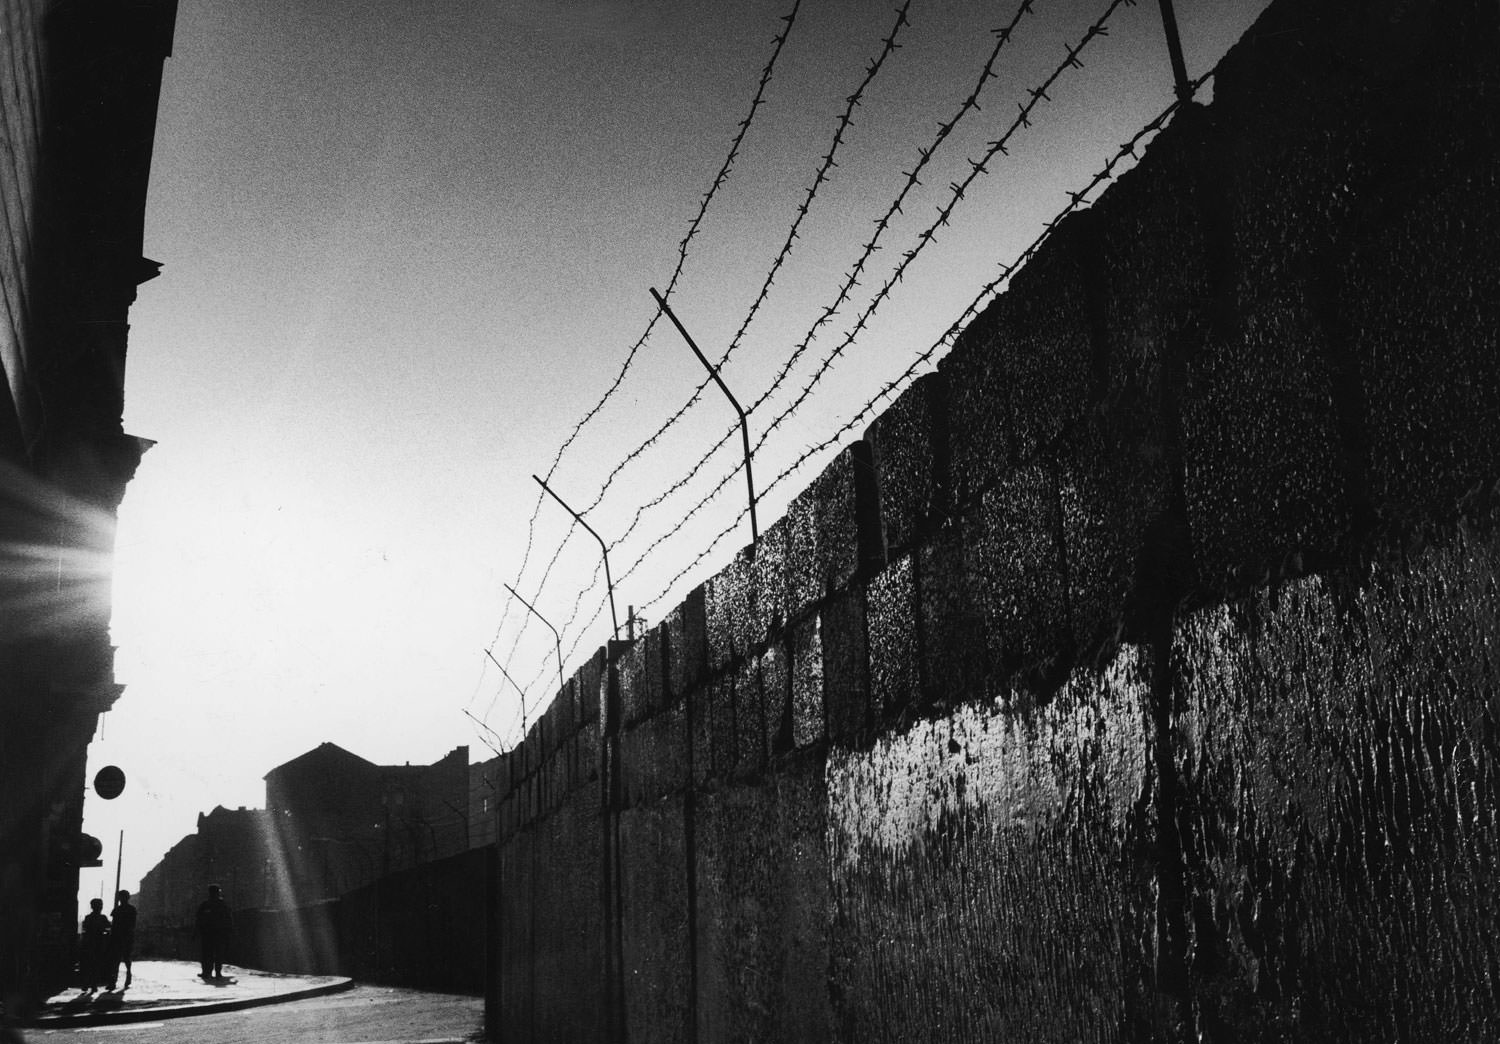 Sunlight shines on the barbed wire and blocks of the Berlin Wall in August 1961.